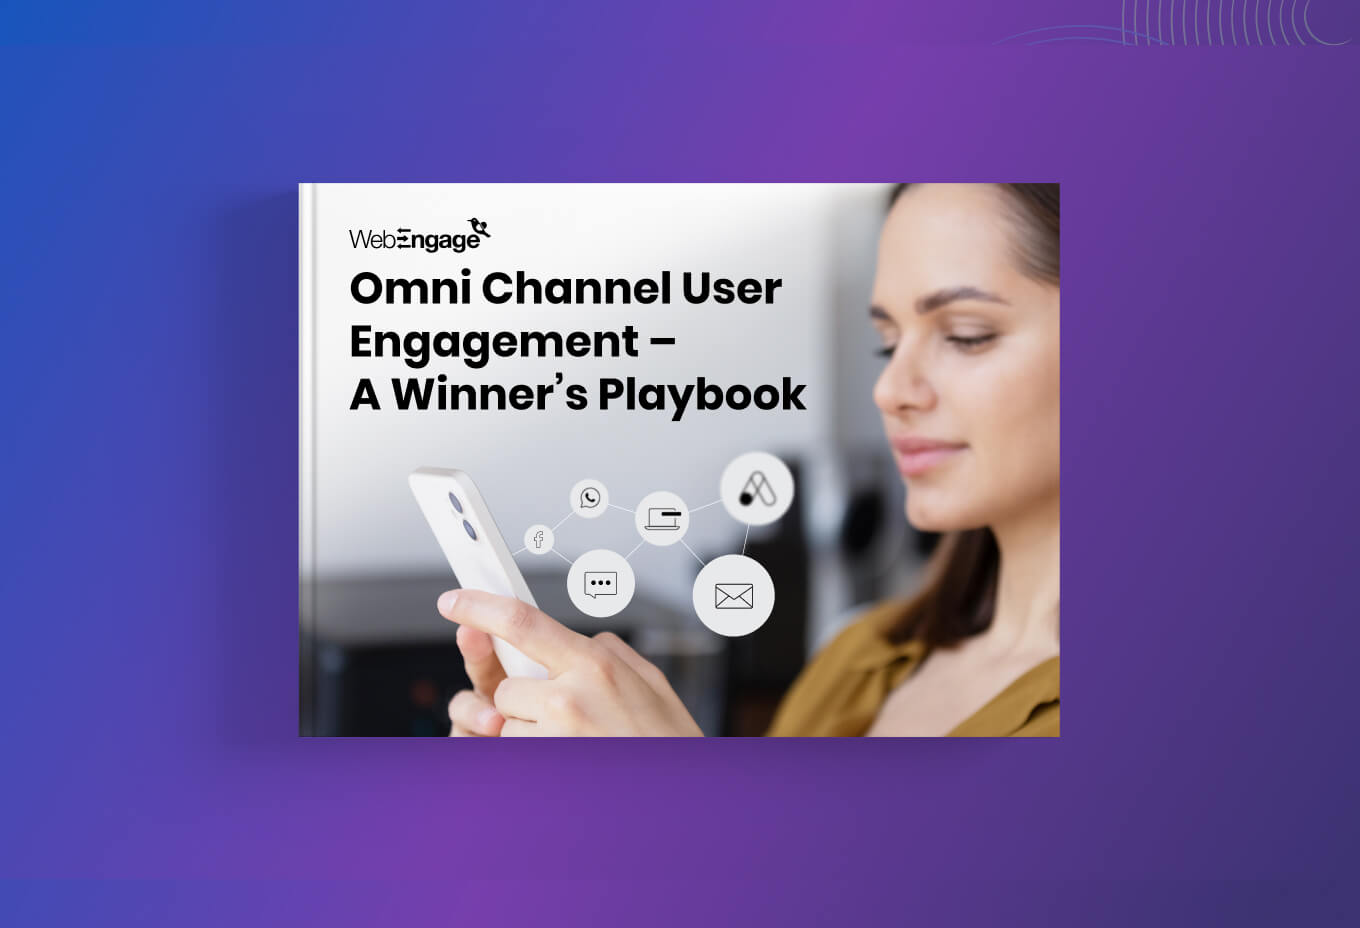 Omni Channel Customer Engagement: A Winner's Playbook